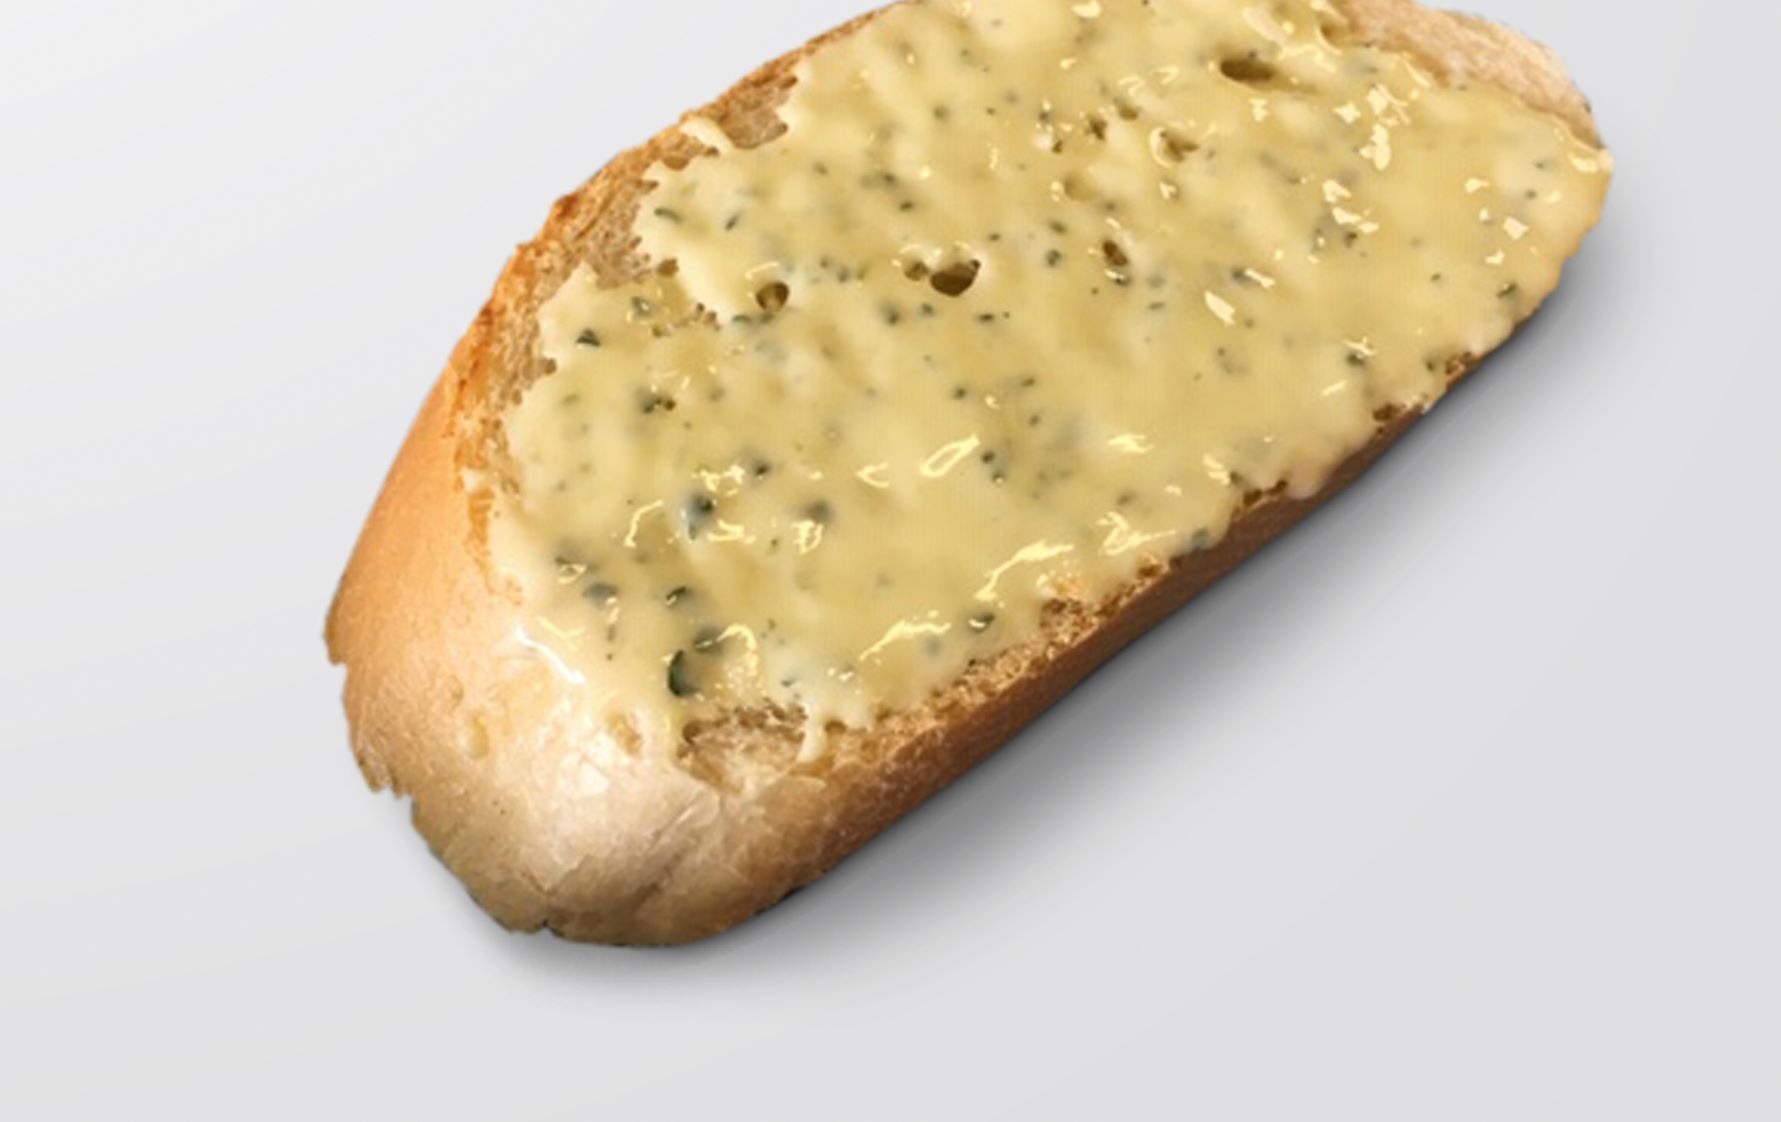 Piece of bread with garlic butter neatly applied by FoodJet garlic butter depositor